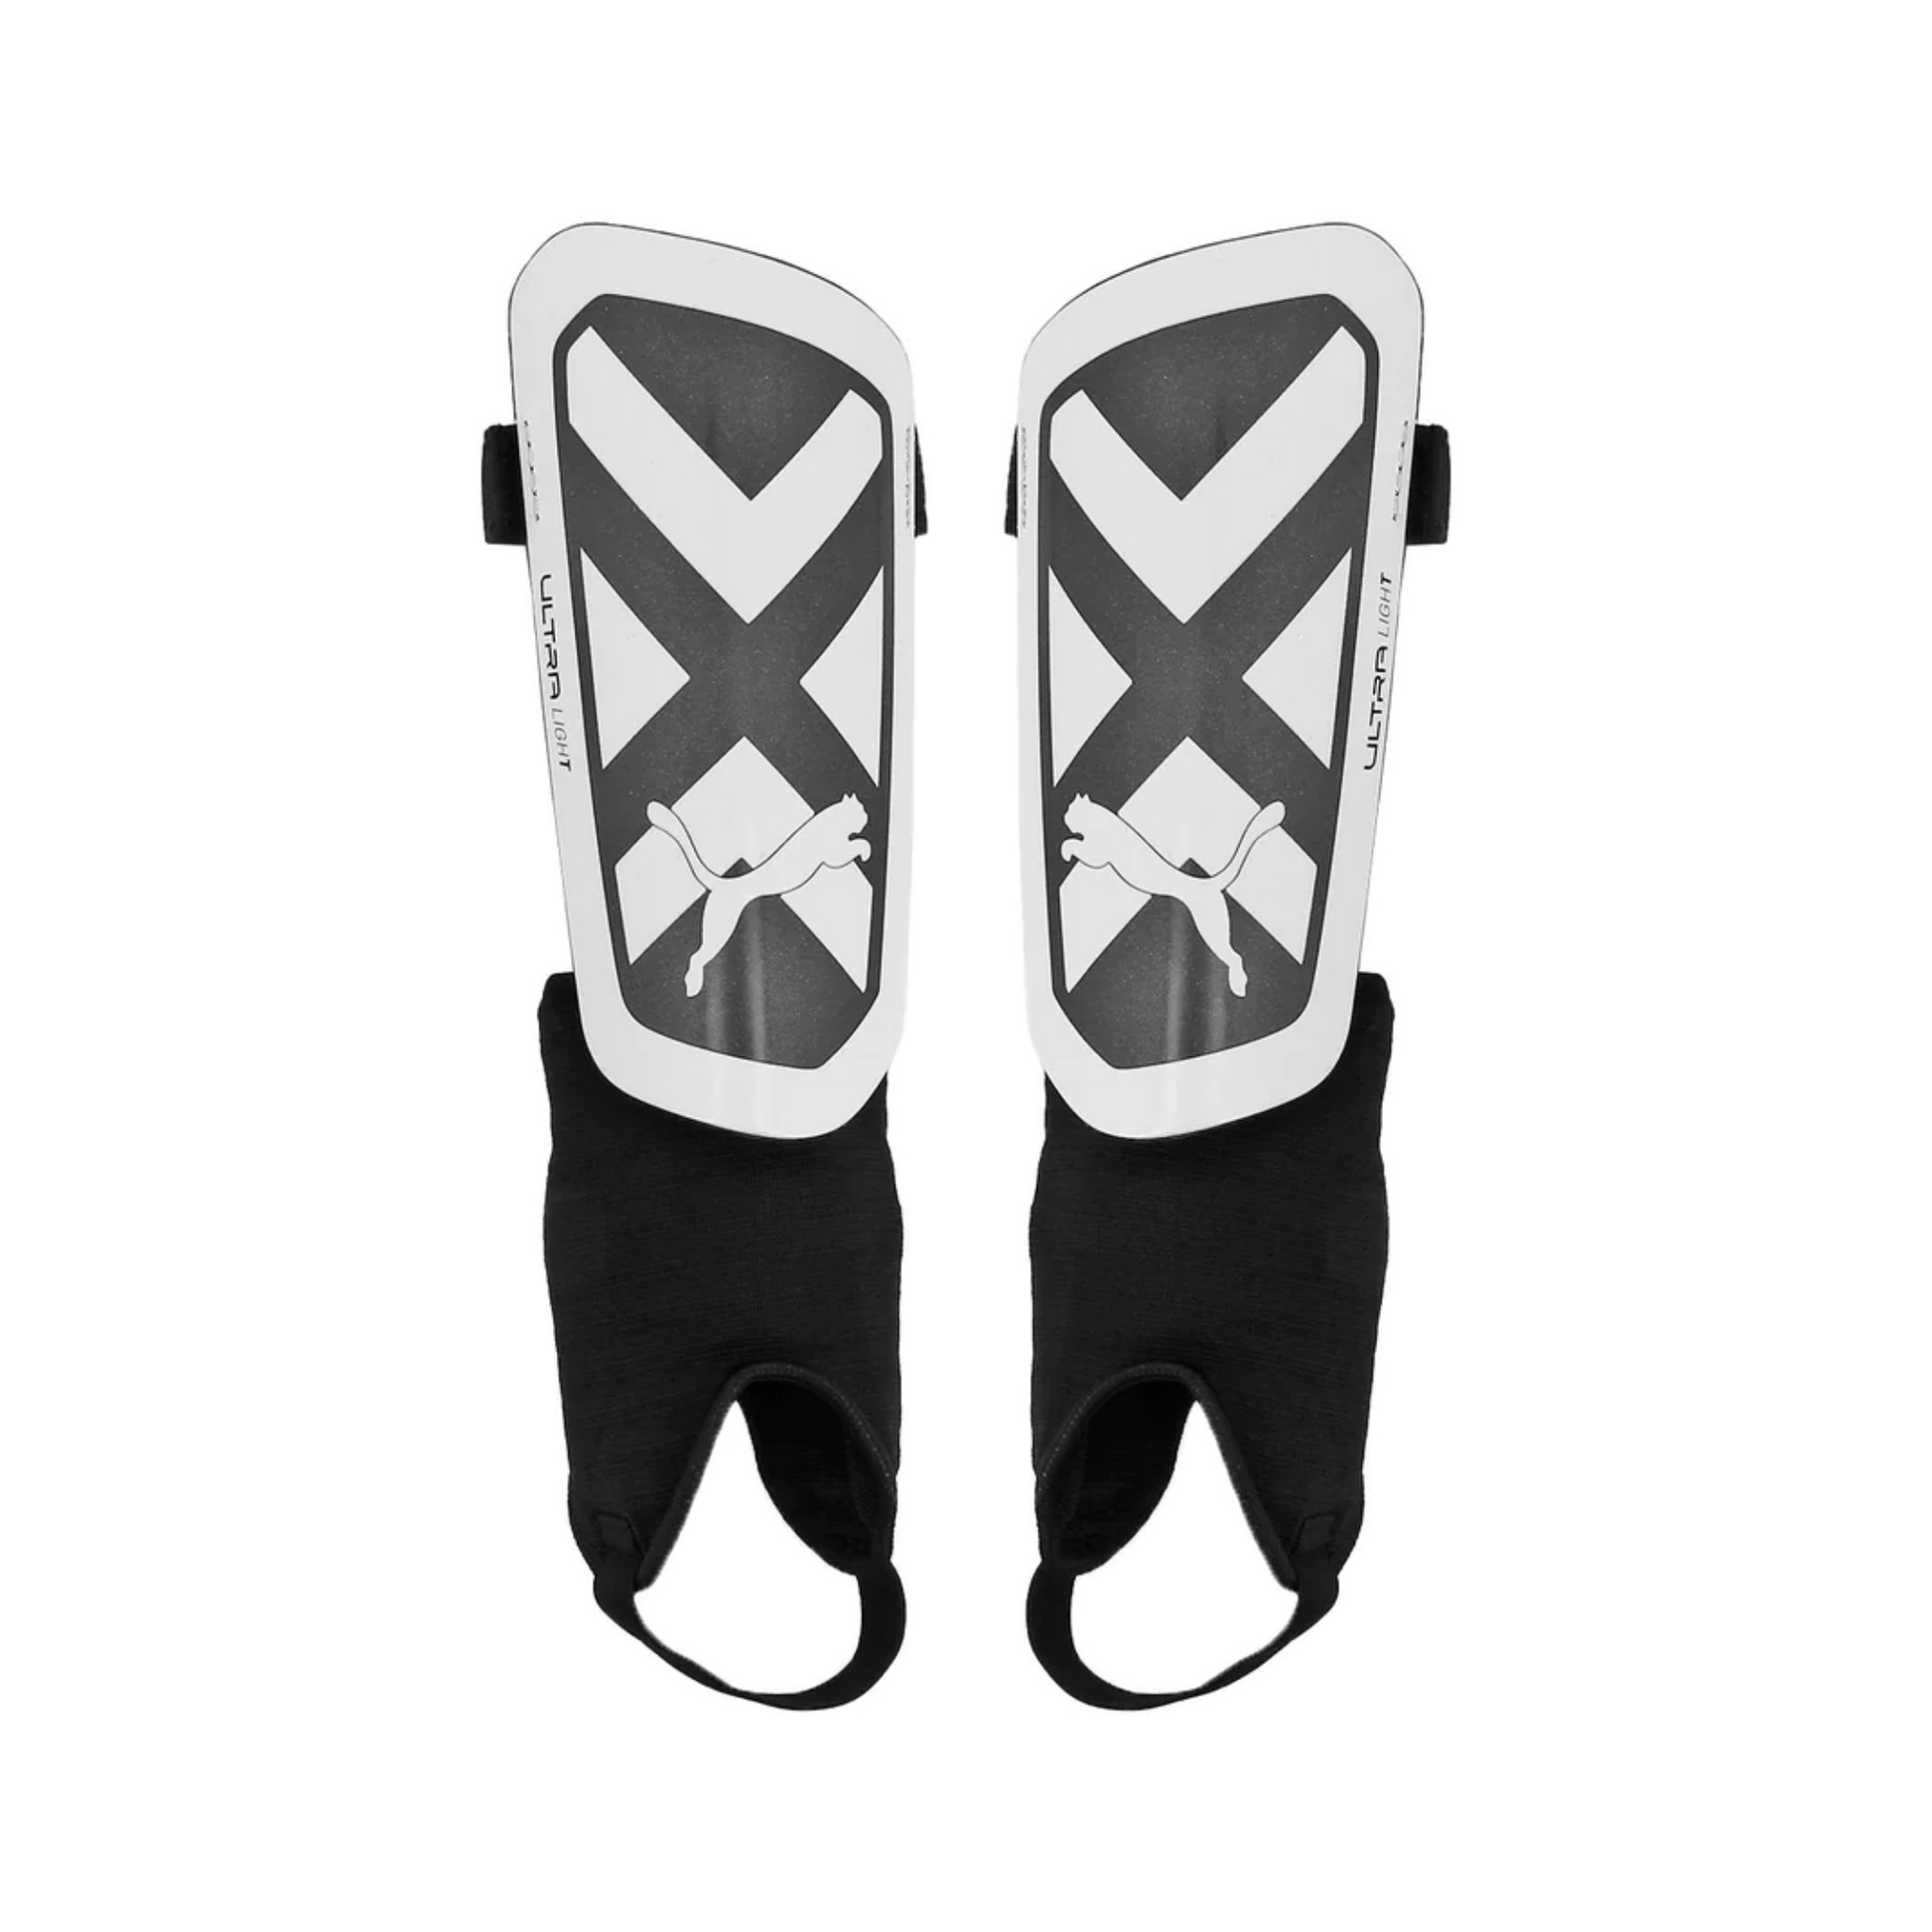 A photo of the Puma Ultra Light Youth Ankle Shin Guards in colour black and white